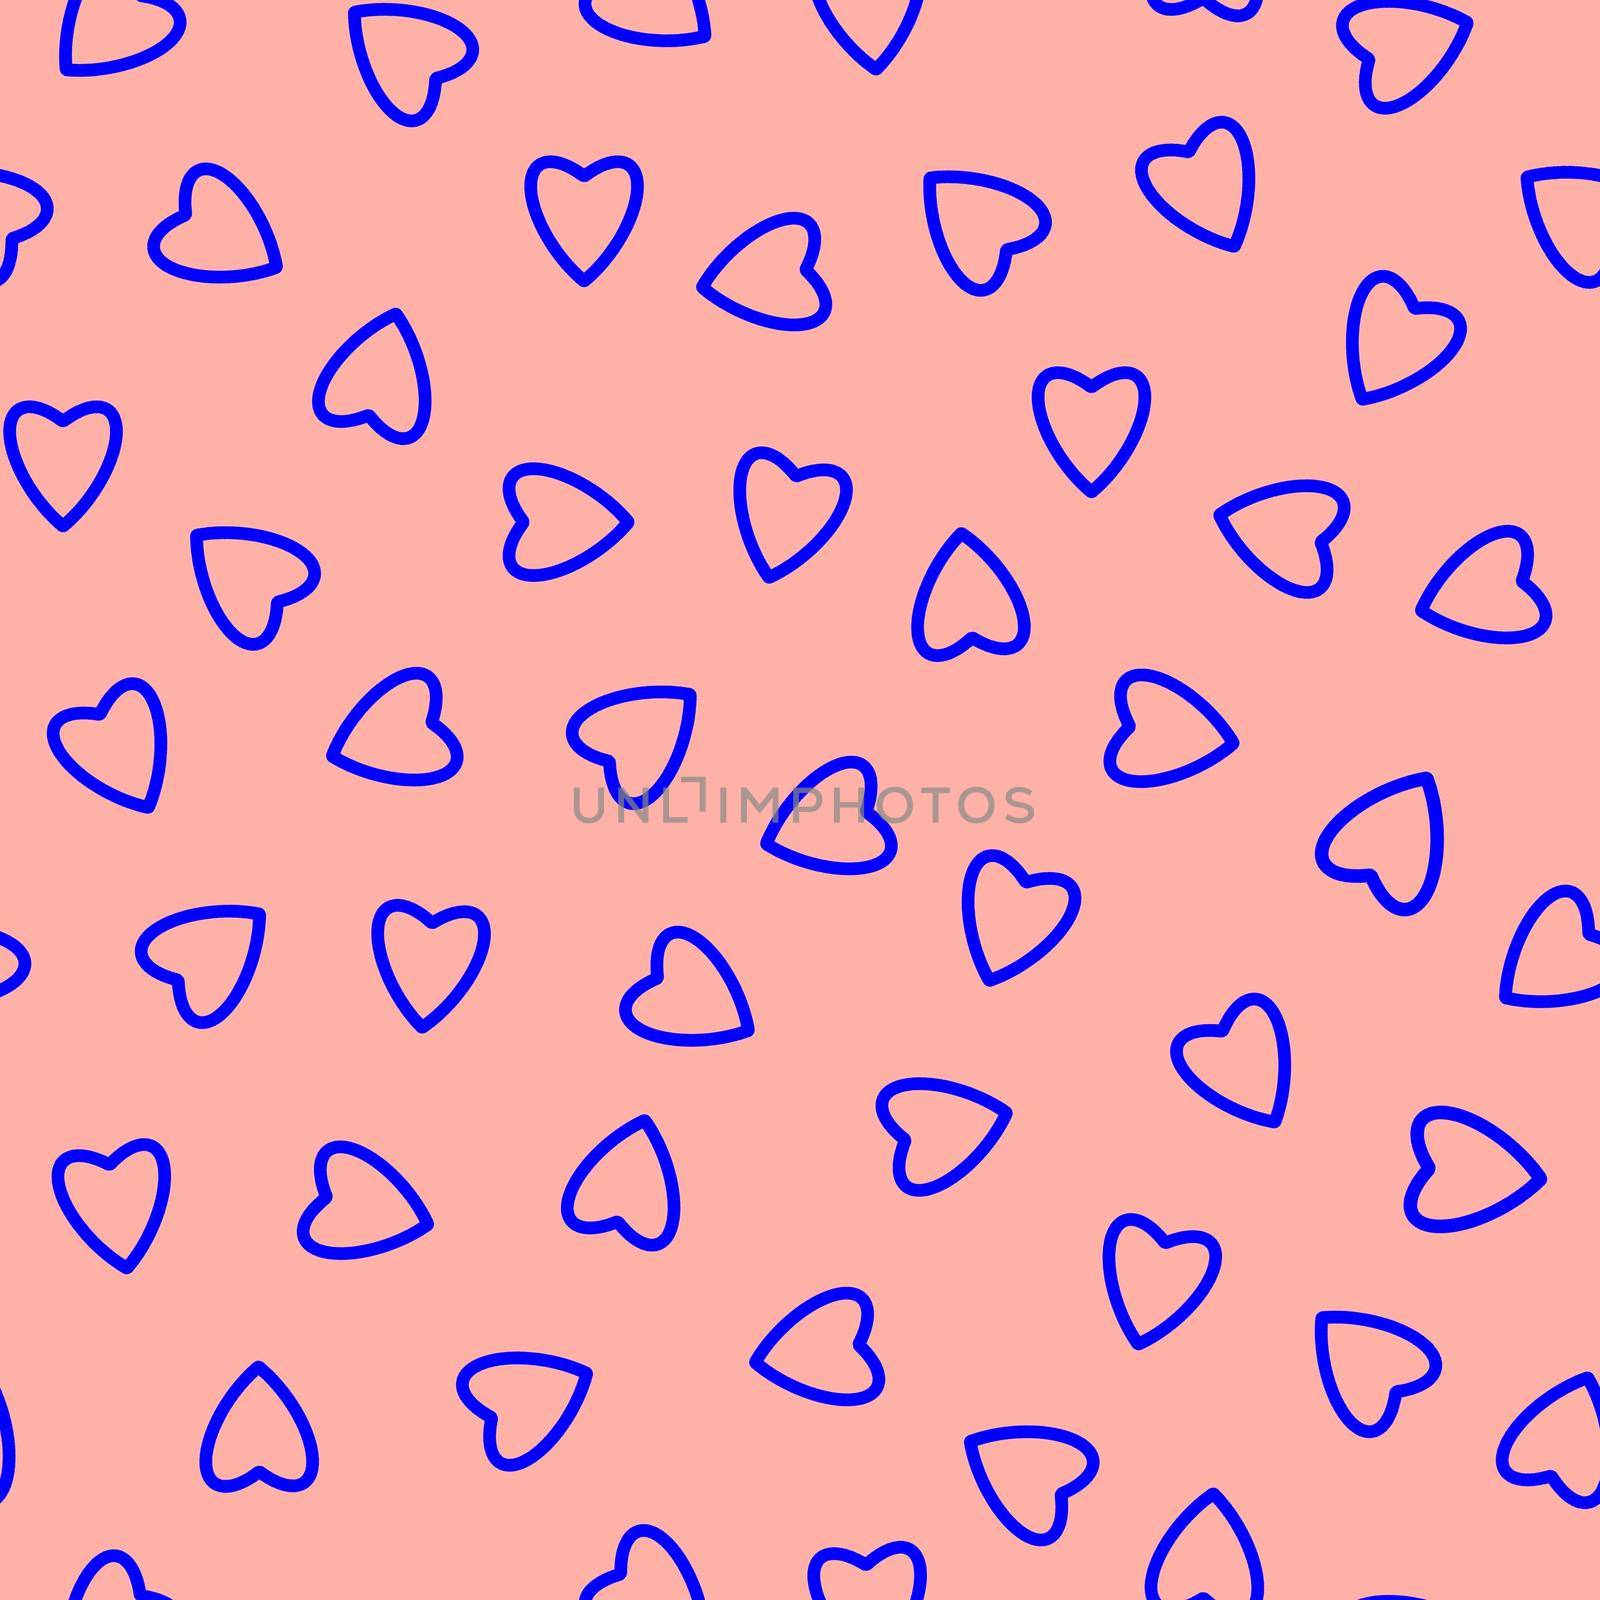 Simple hearts seamless pattern,endless chaotic texture made of tiny heart silhouettes.Valentines,mothers day background.Great for Easter,wedding,scrapbook,gift wrapping paper,textiles.Blue on peach.